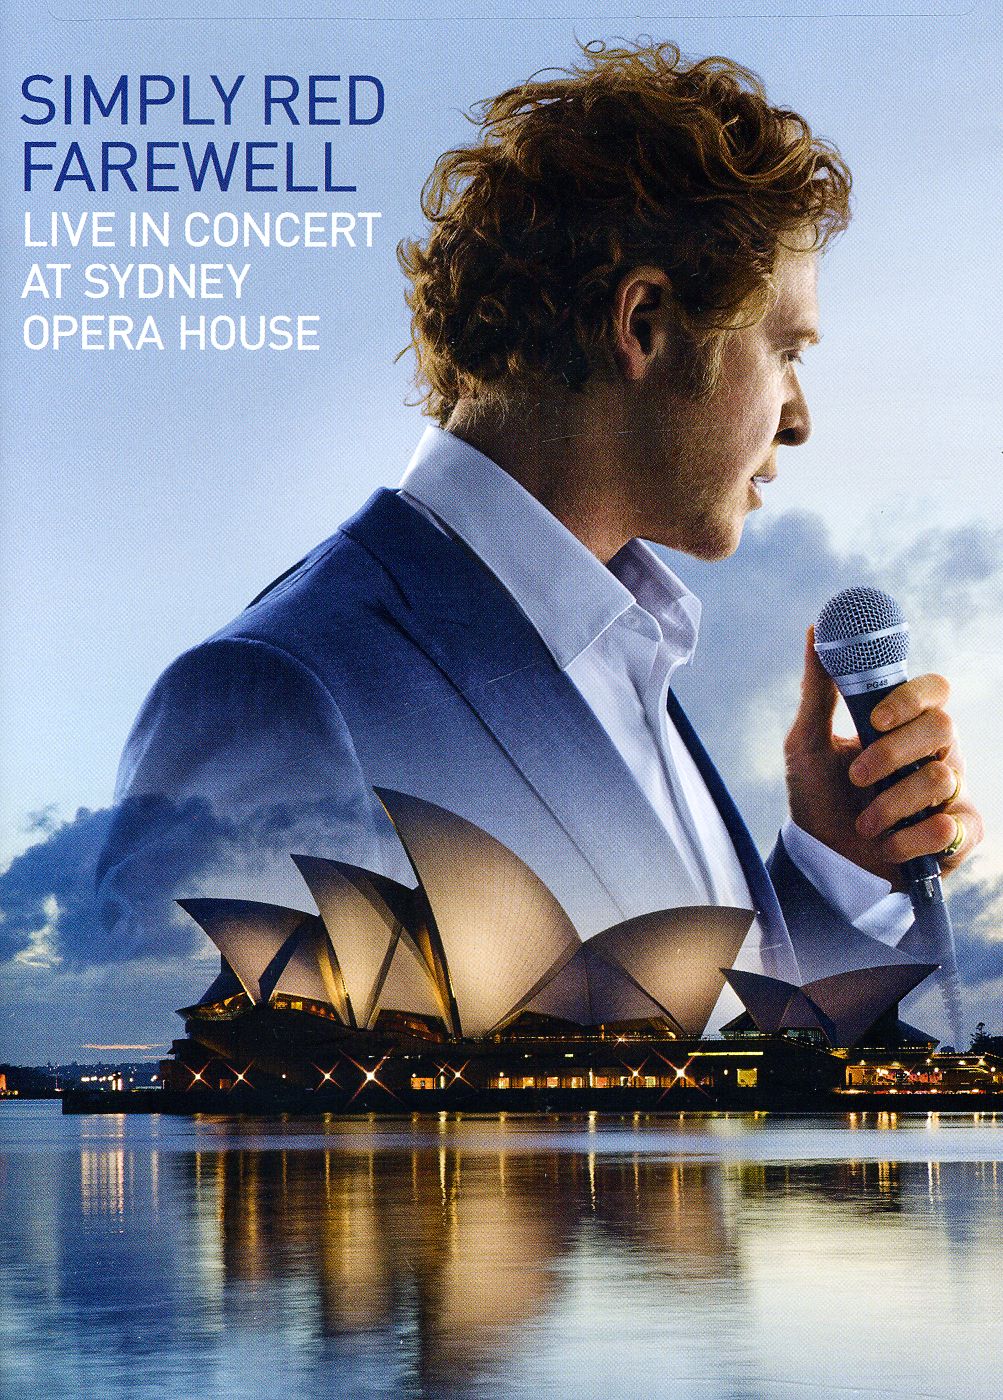 2010 FAREWELL: LIVE IN CONCERT